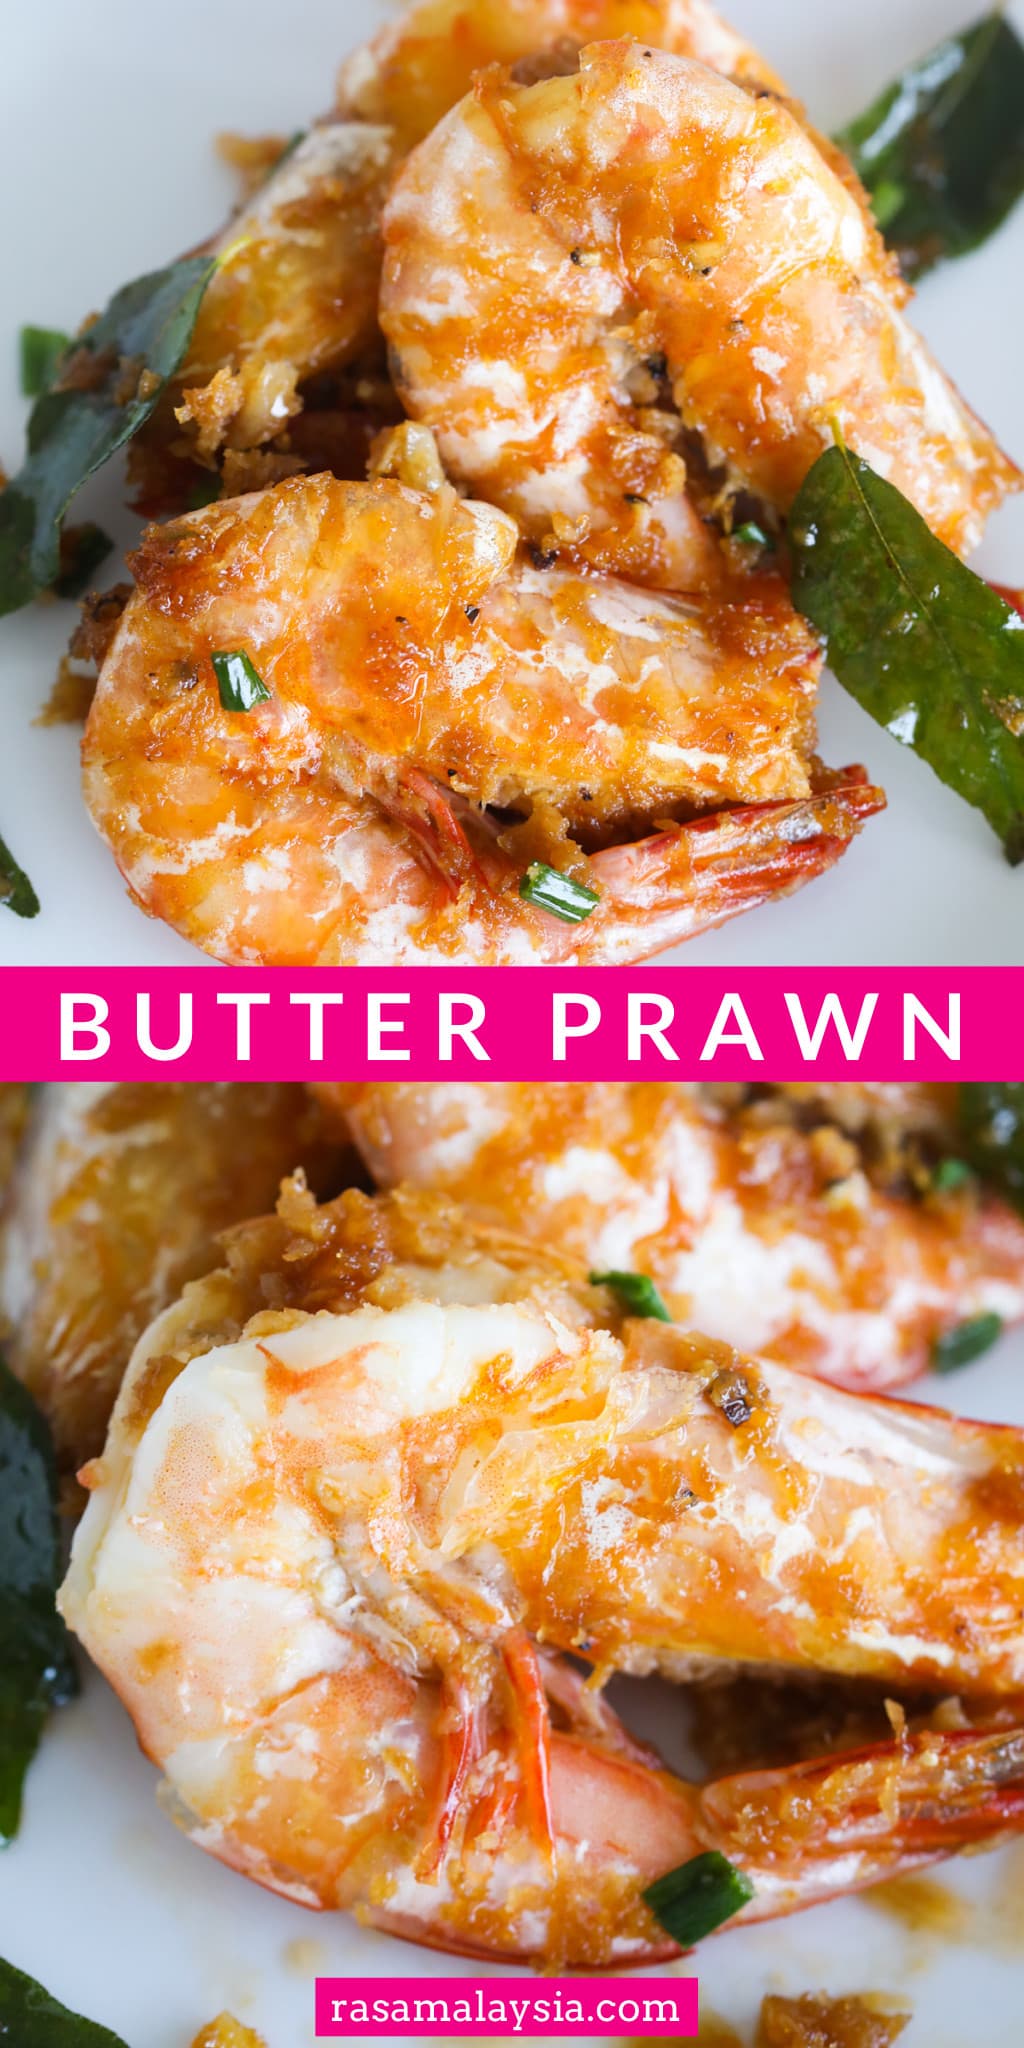 Butter Prawn is a Malaysian recipe that is buttery, salty, sweet, spicy, and garlicky. The main ingredients are prawn, butter, grated coconut and curry leaves.